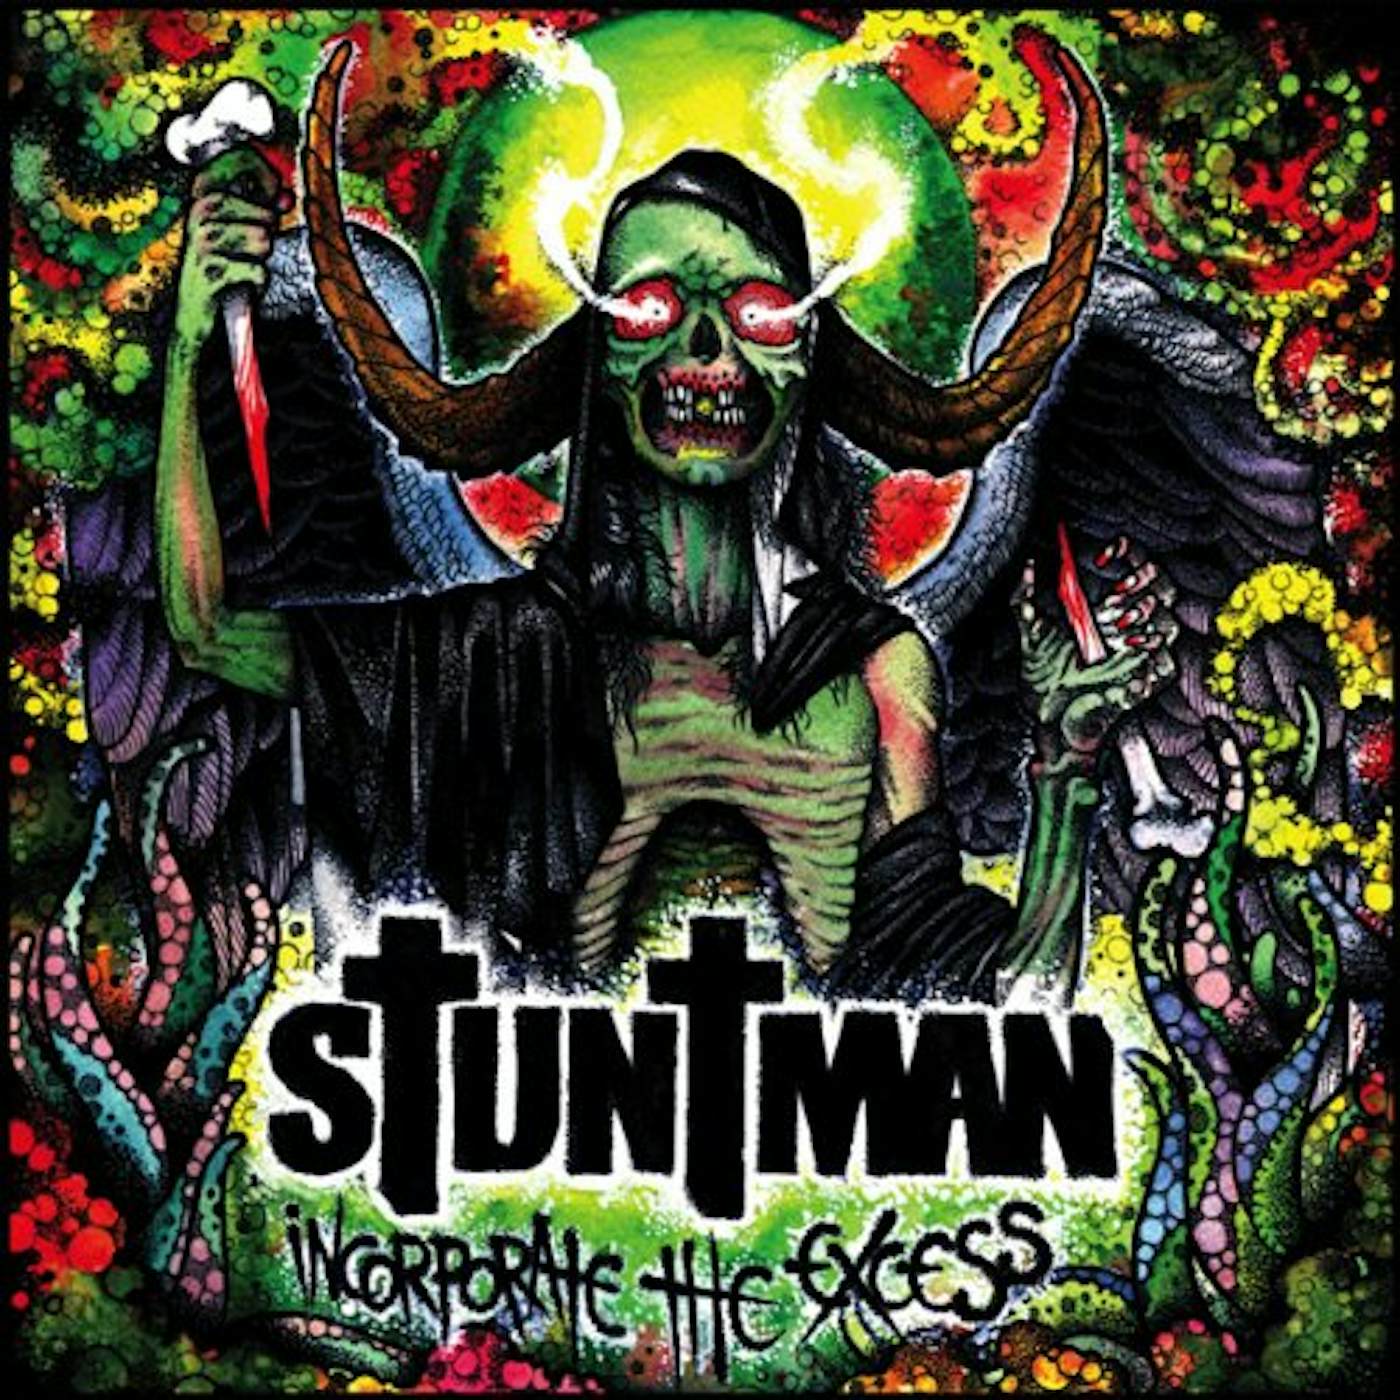 Stuntman INCORPORATE THE EXCESS CD